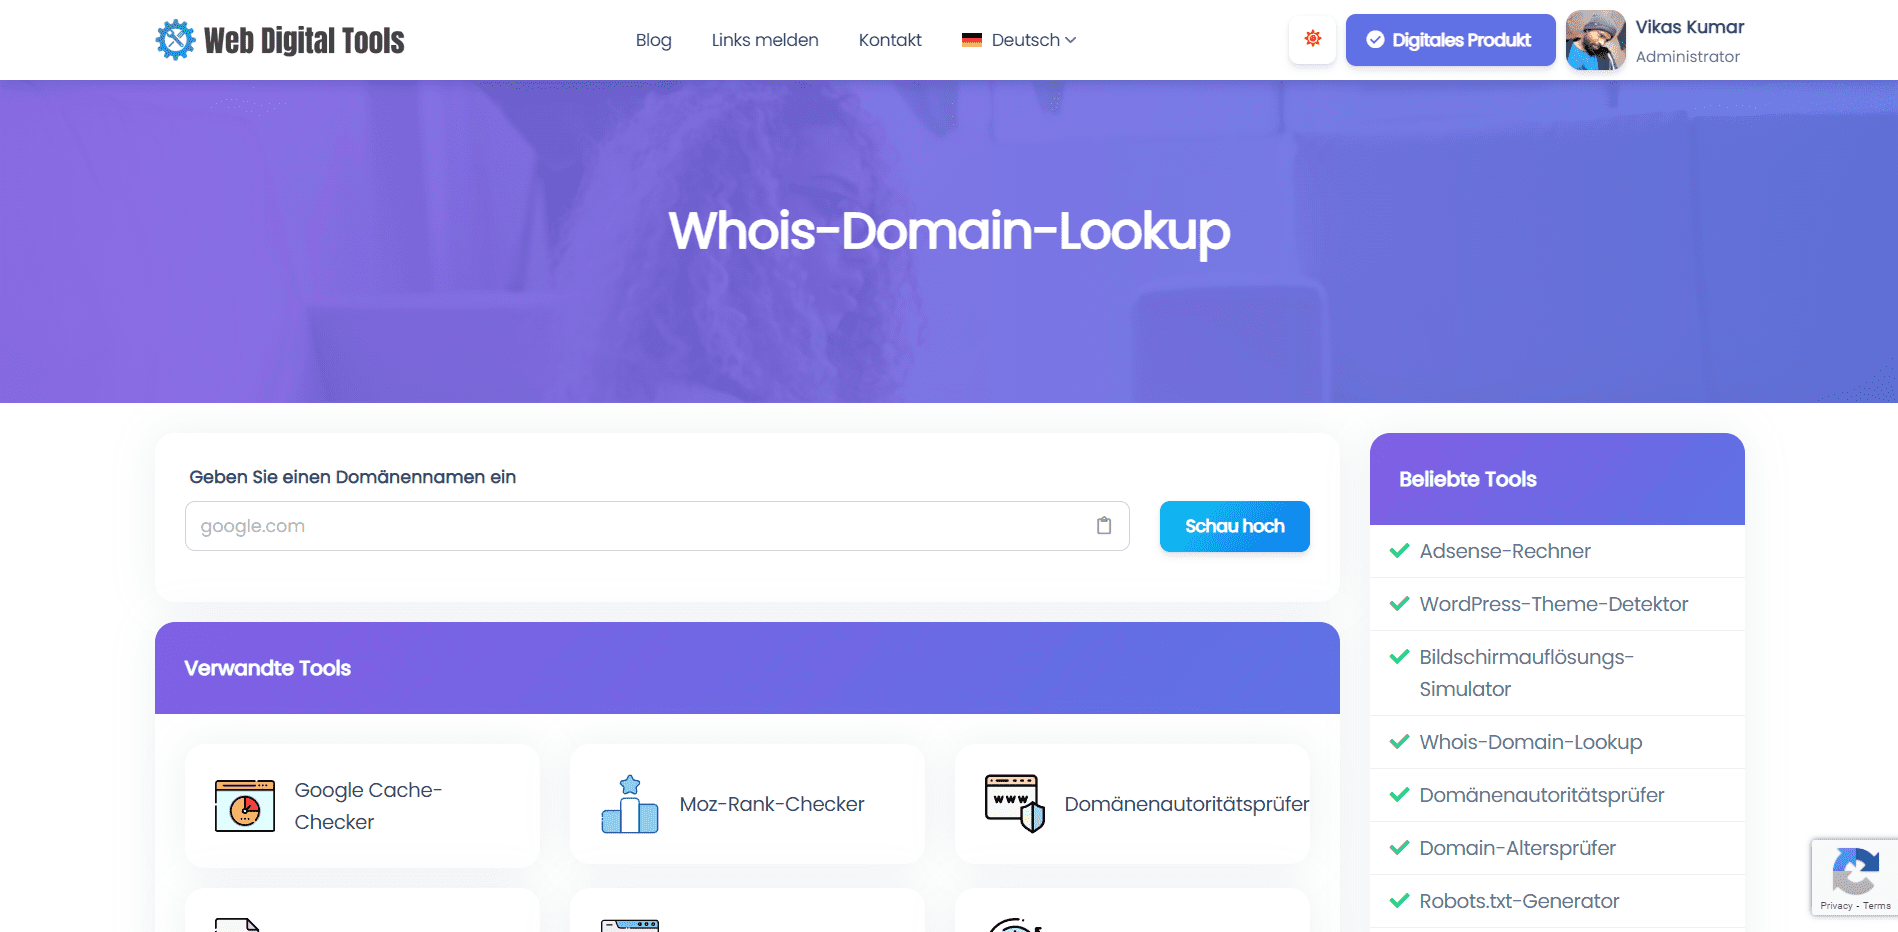 Whois-Domain-Lookup